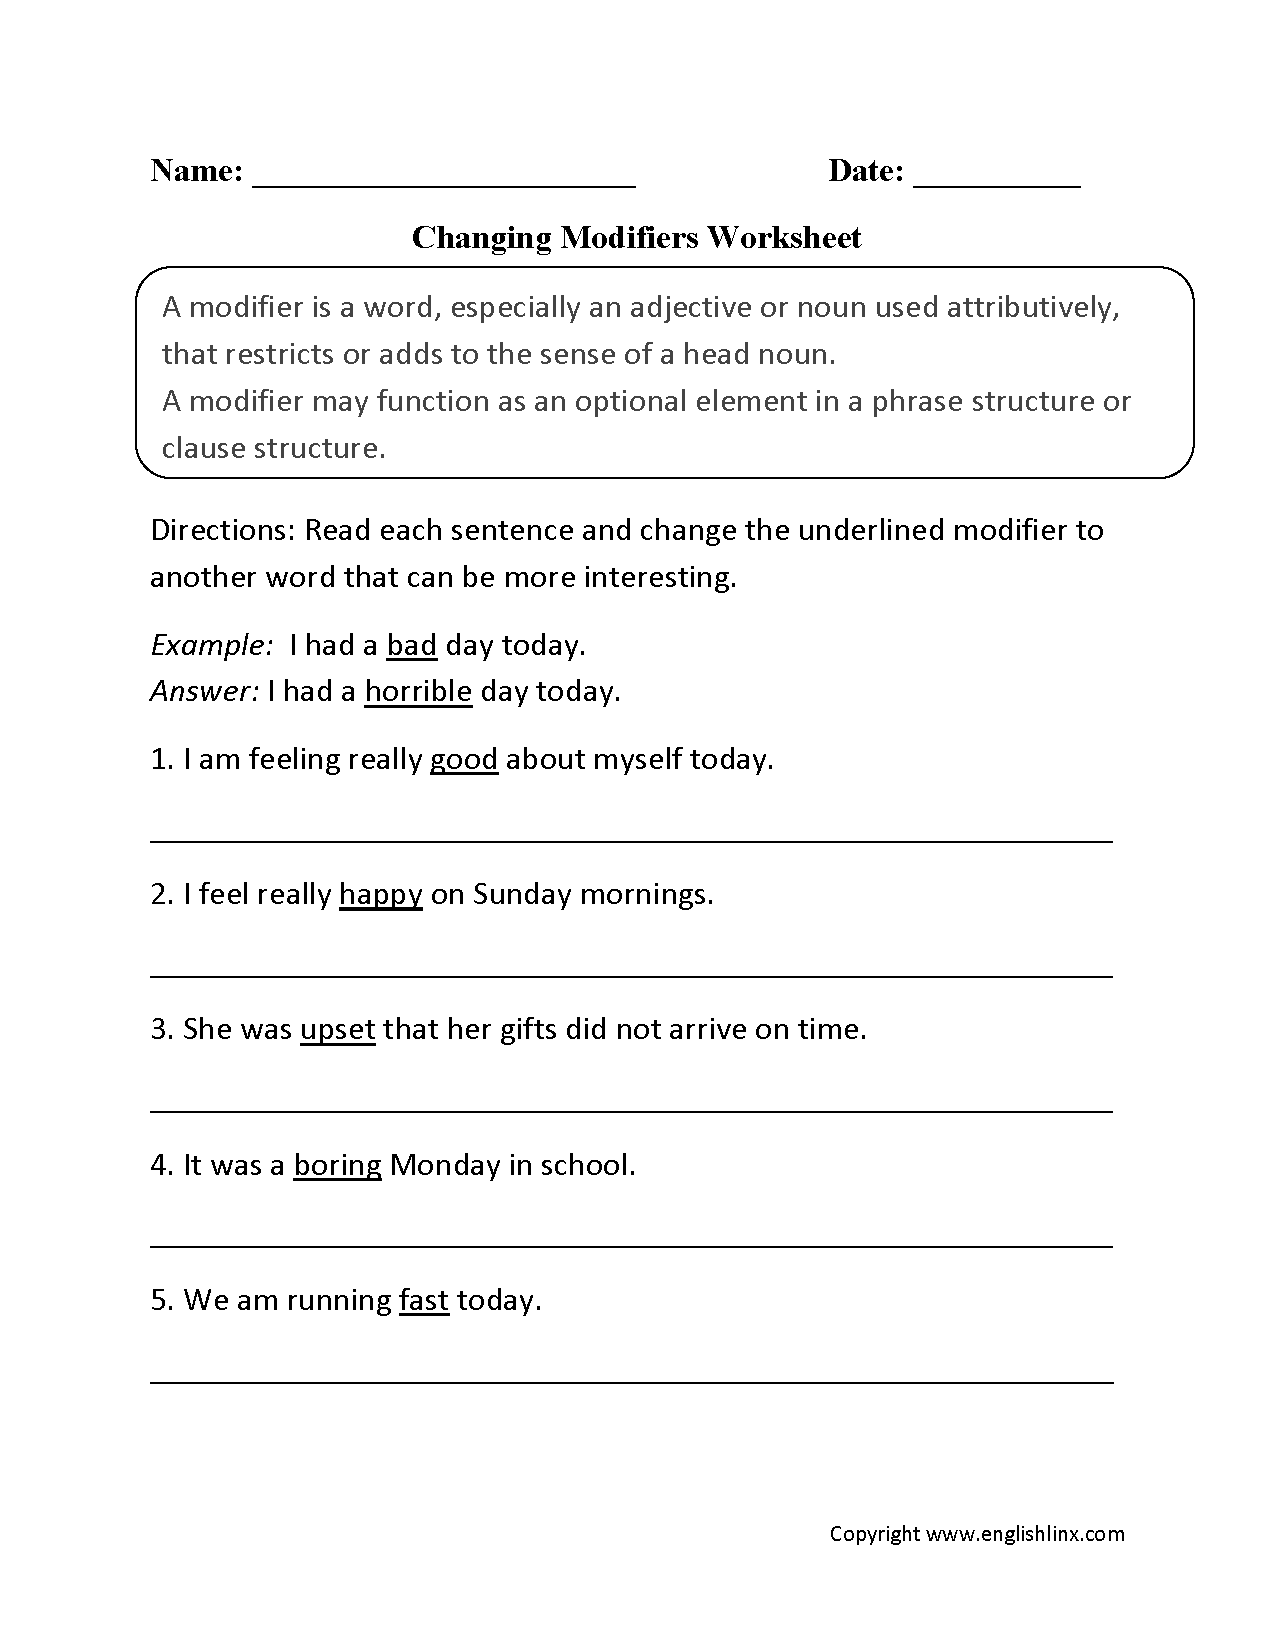 Changing Modifiers Worksheet